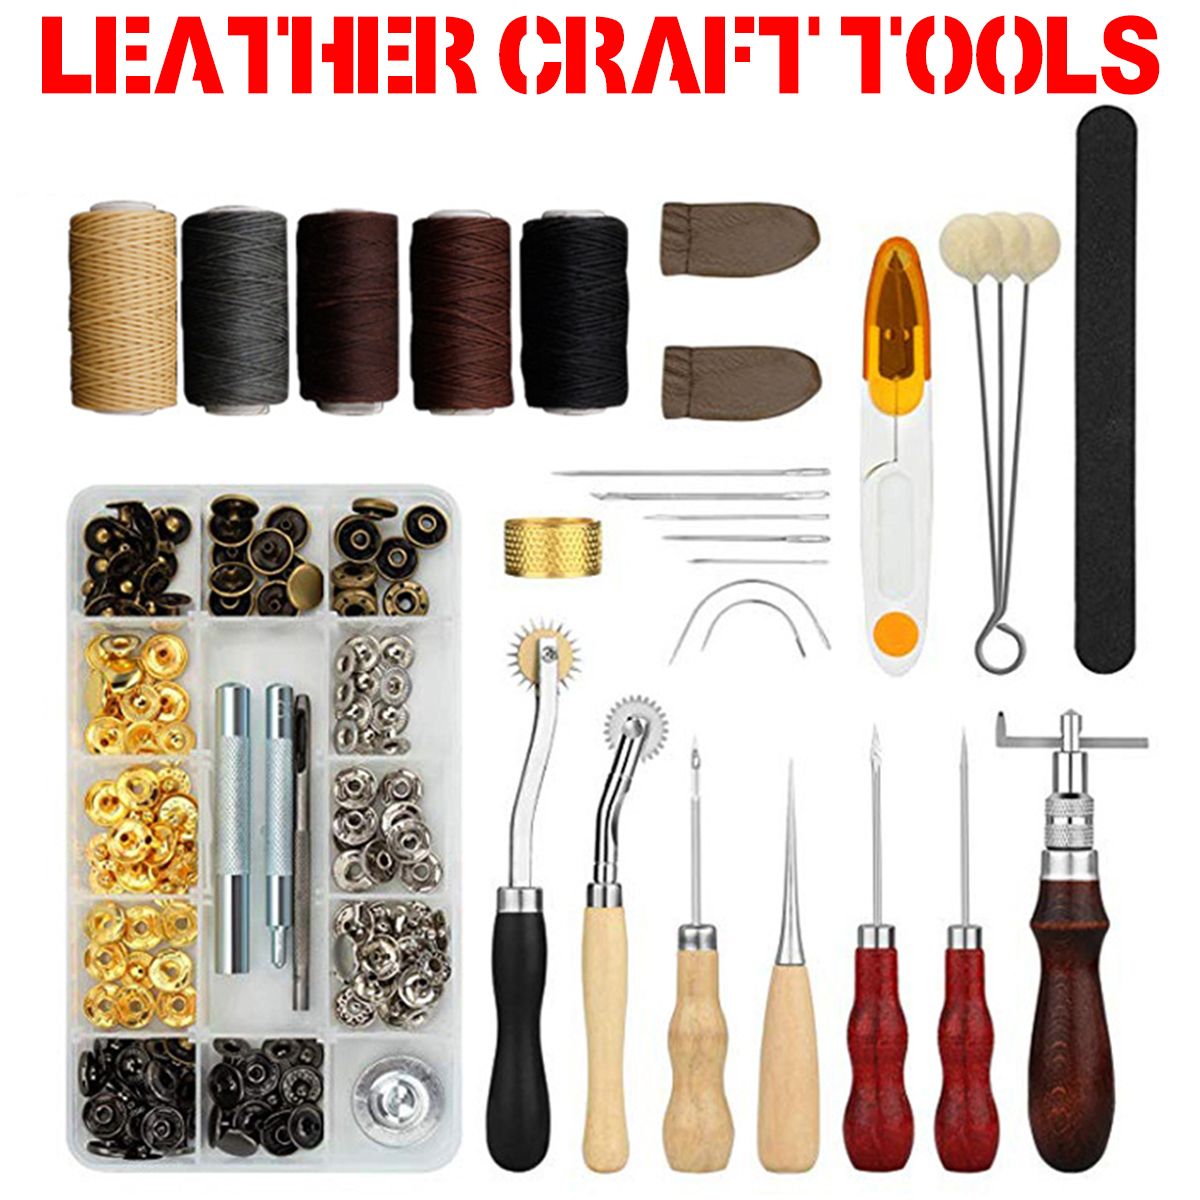 Leather-Craft-Tools-Kit-Hand-Sewing-Stitching-Punch-Carving-Saddle-Rivets-Tool-1626103